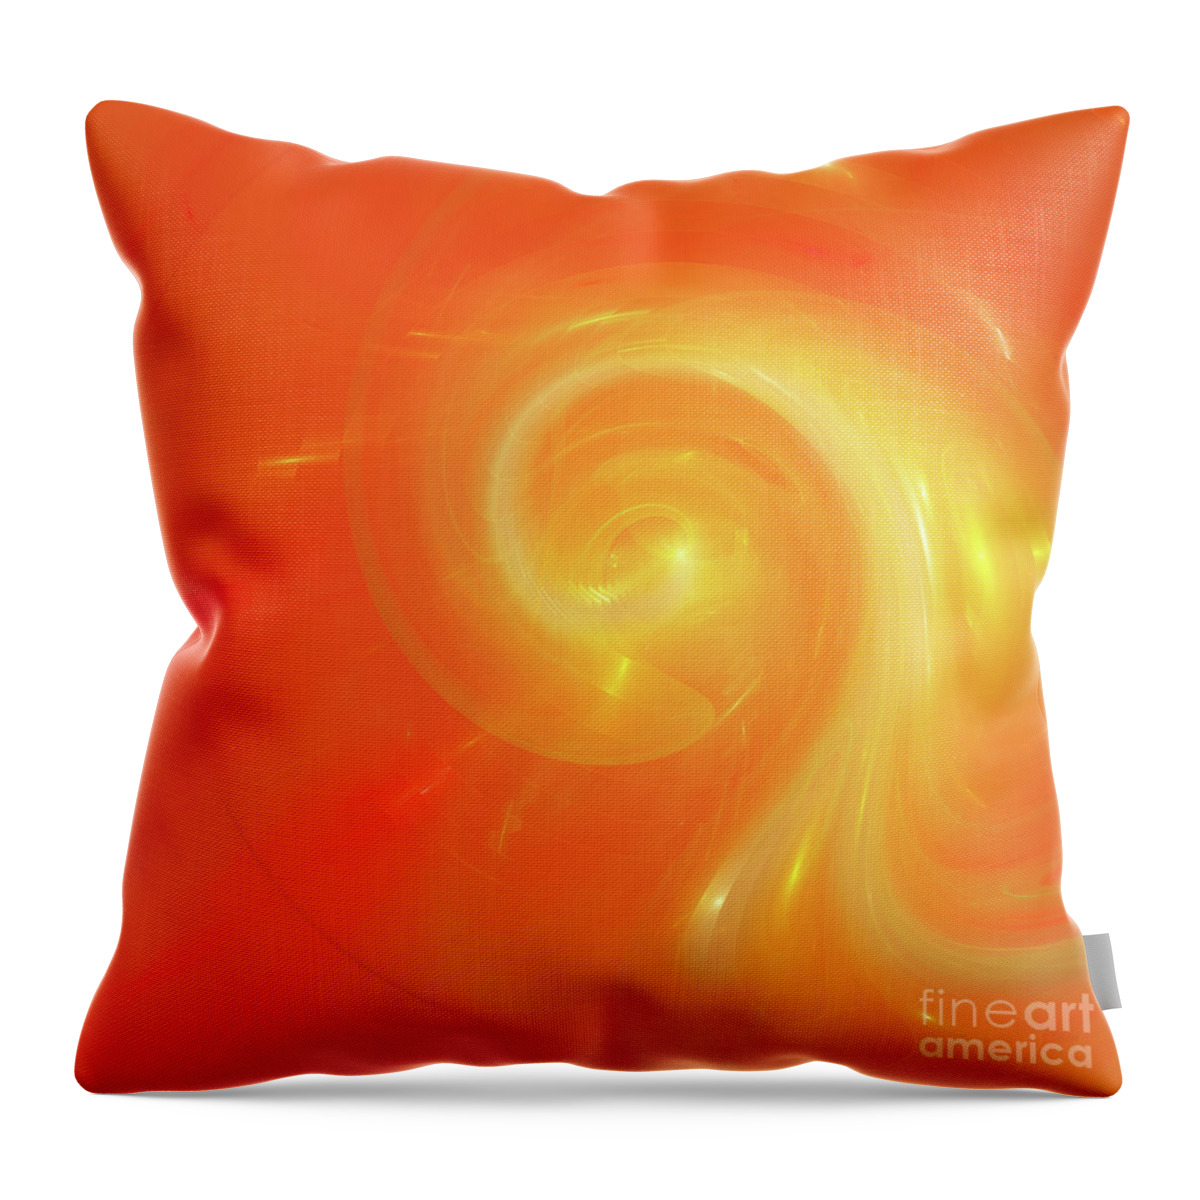 Andee Design Orange Abstract Throw Pillow featuring the digital art Andee Design Abstract 5 2017 by Andee Design